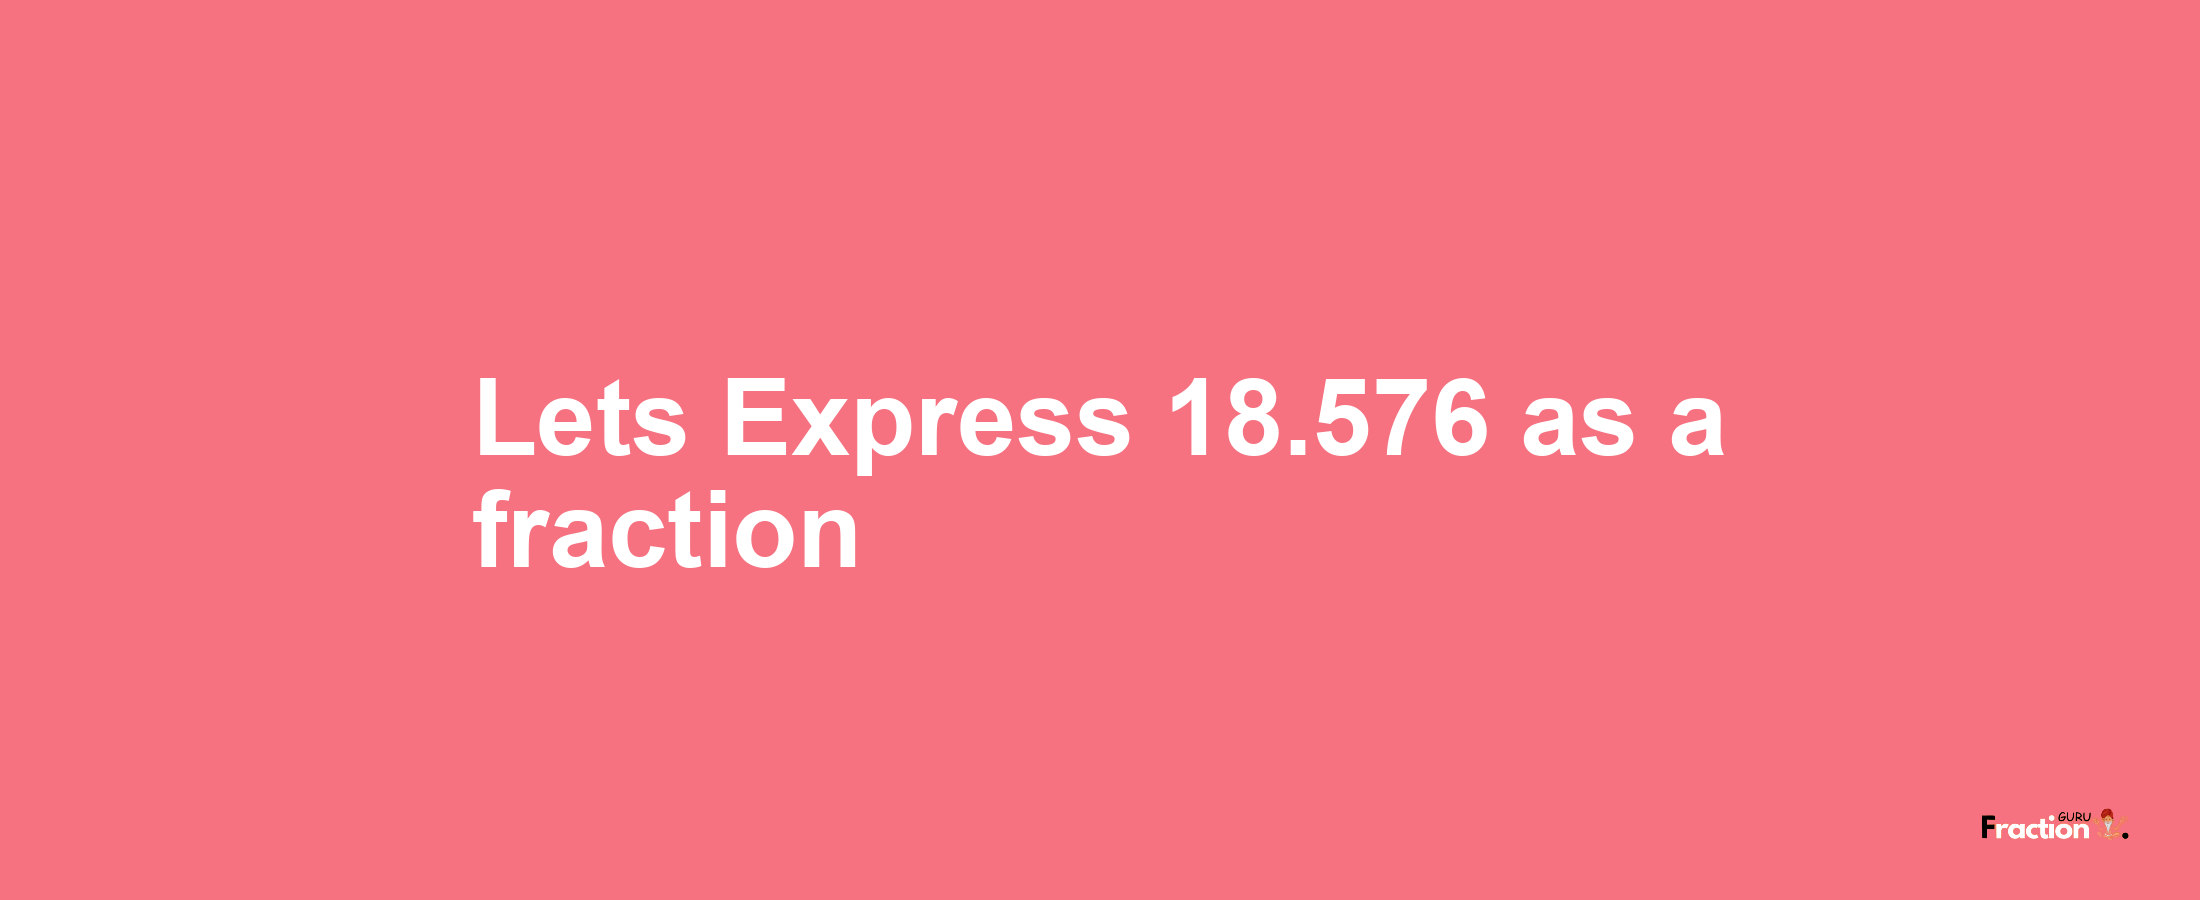 Lets Express 18.576 as afraction